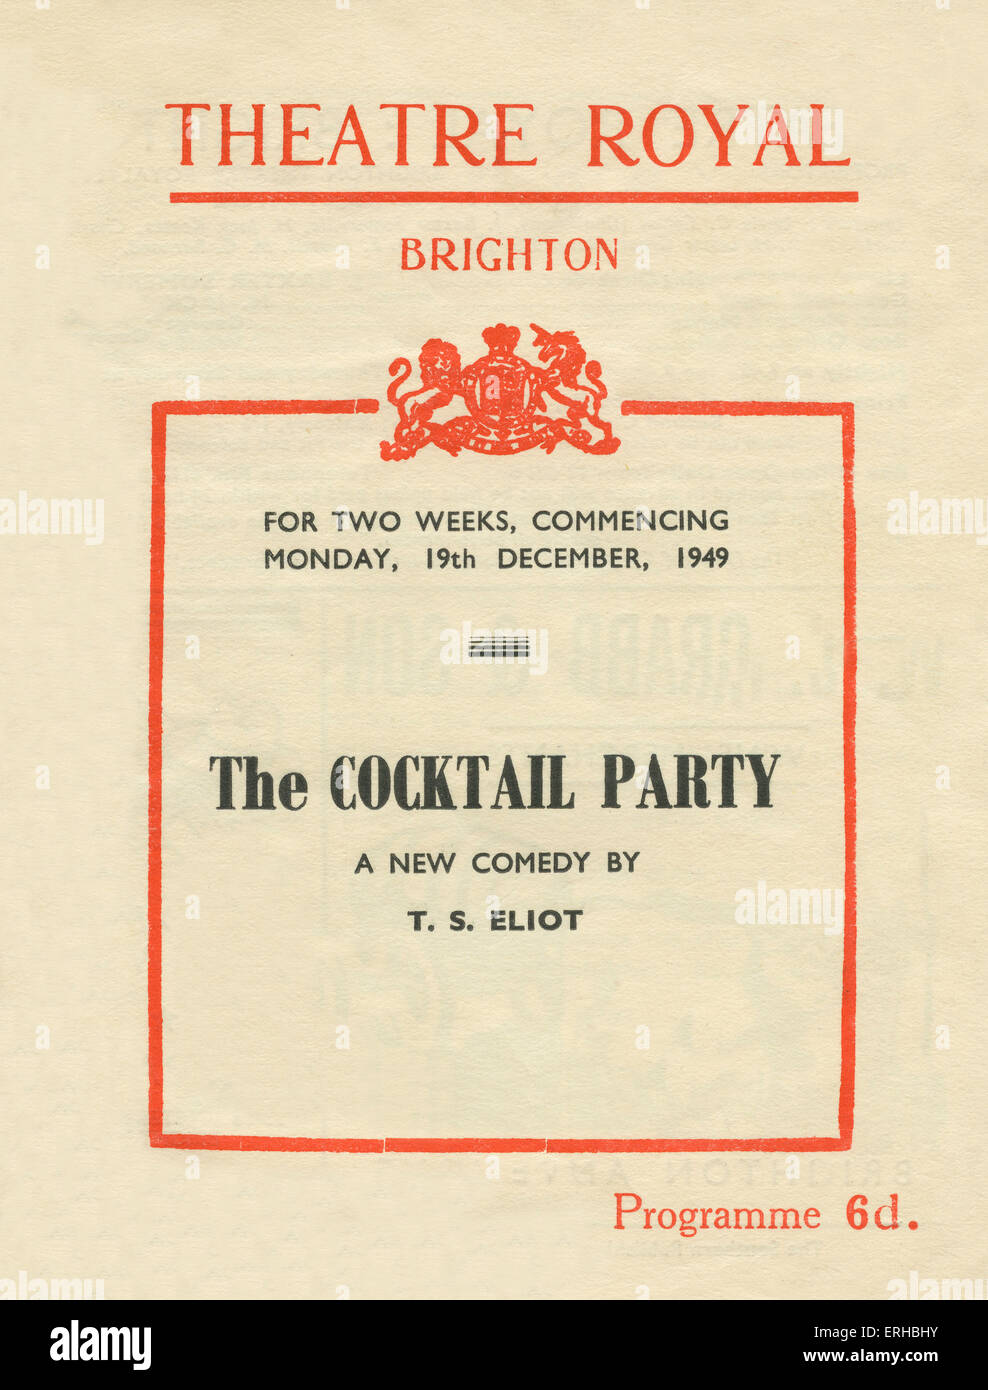 T S Eliot - The Cocktail Party, a new comedy. Programme from Theatre Royal, Brighton commencing 19th December 1949 (same year as premiere at Edinburgh ) Stock Photo